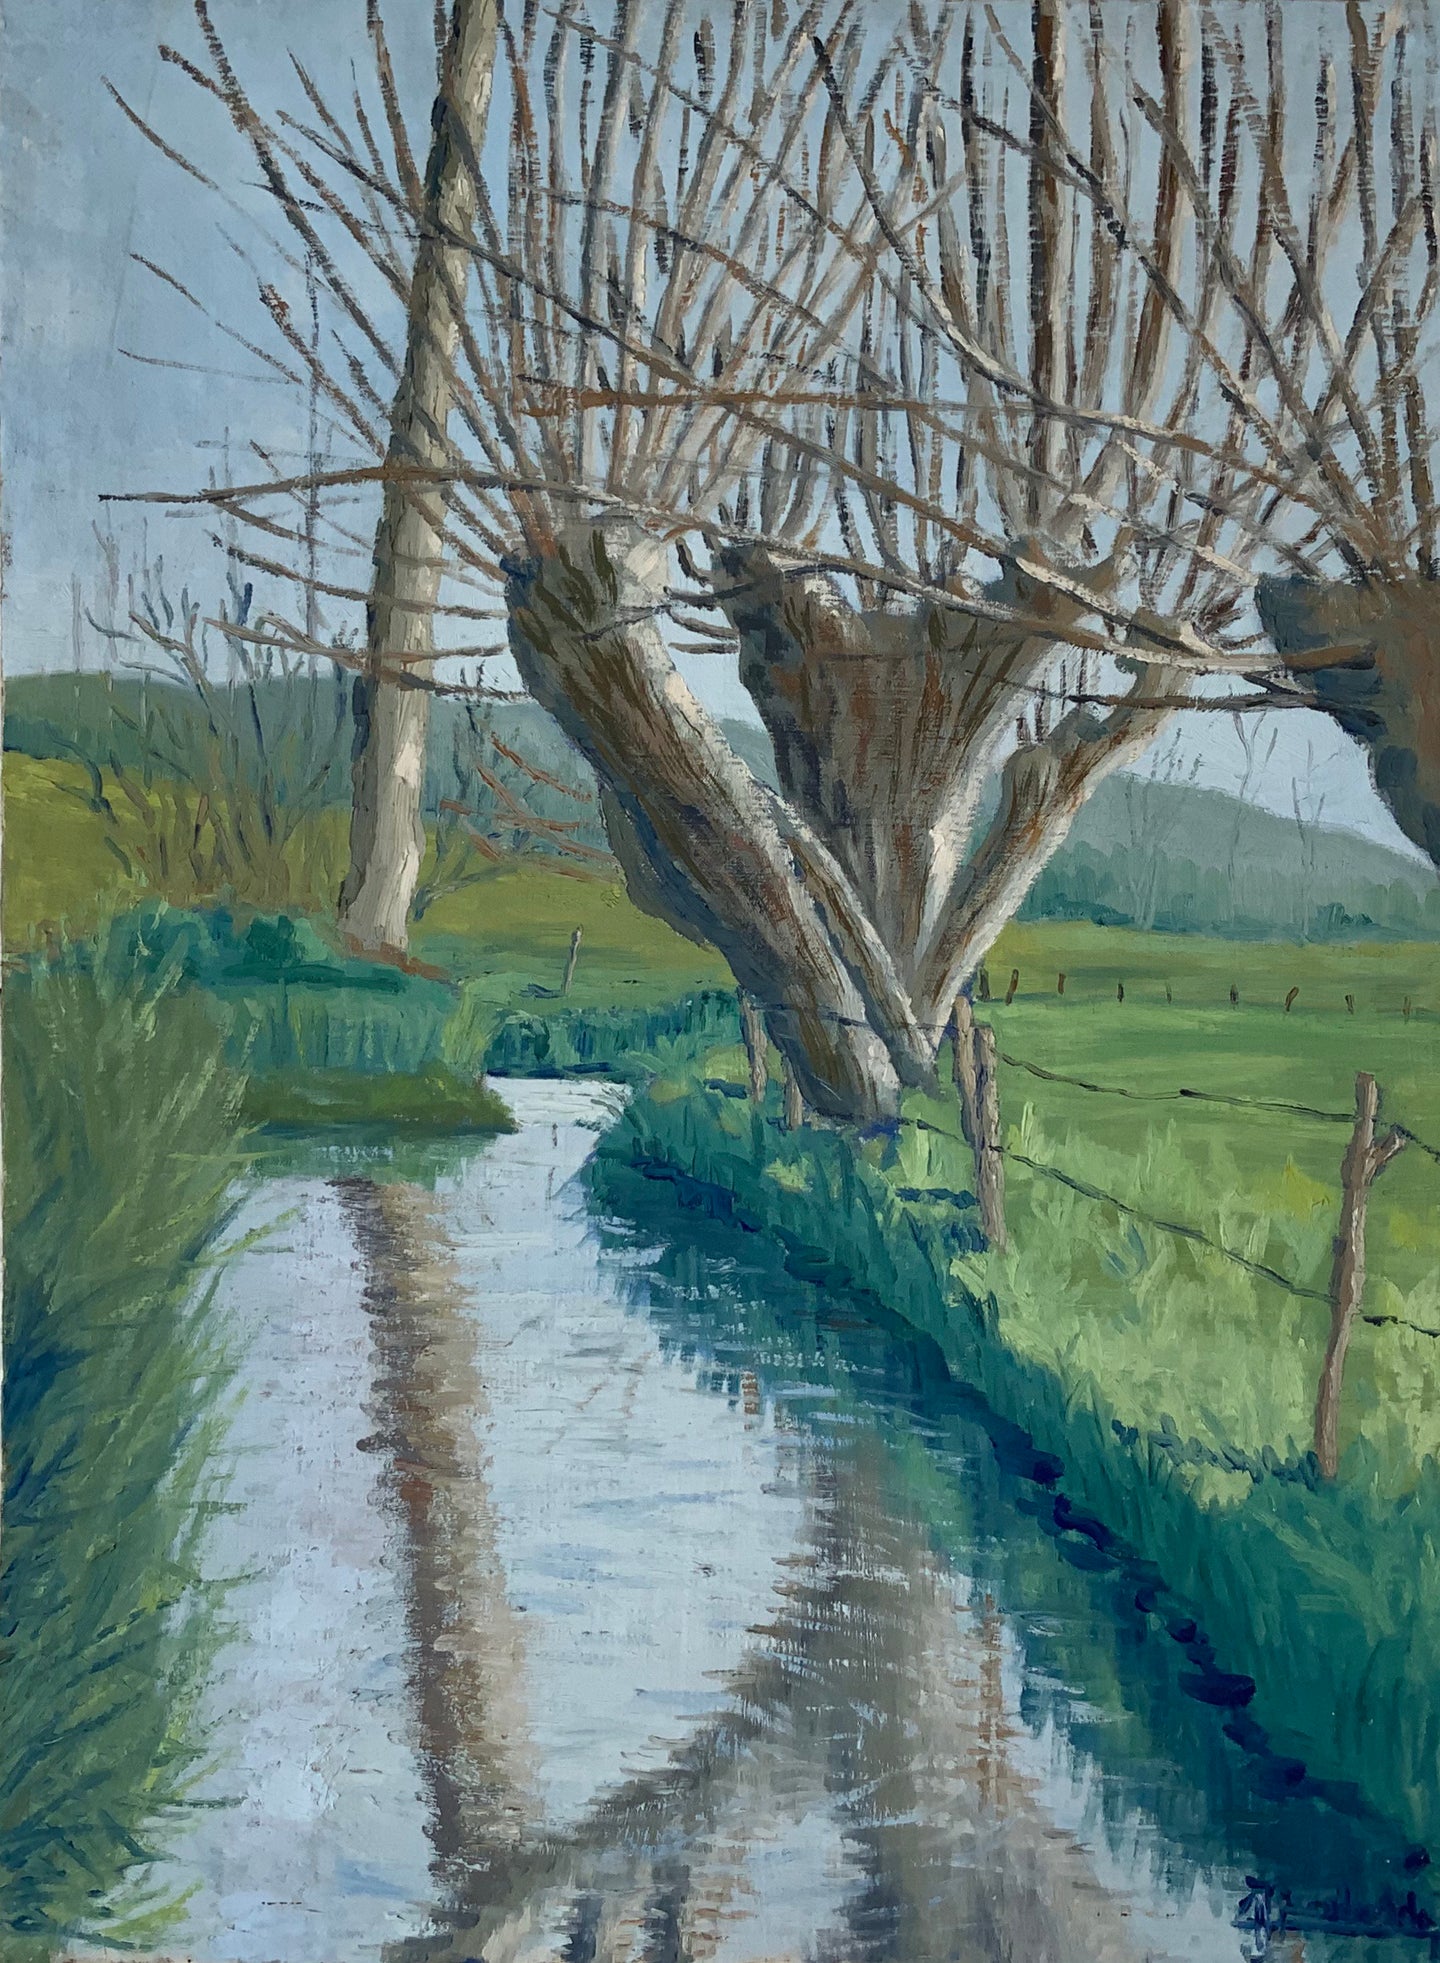 French Original Oil on Canvas - Tree over River - Midcentury Painting